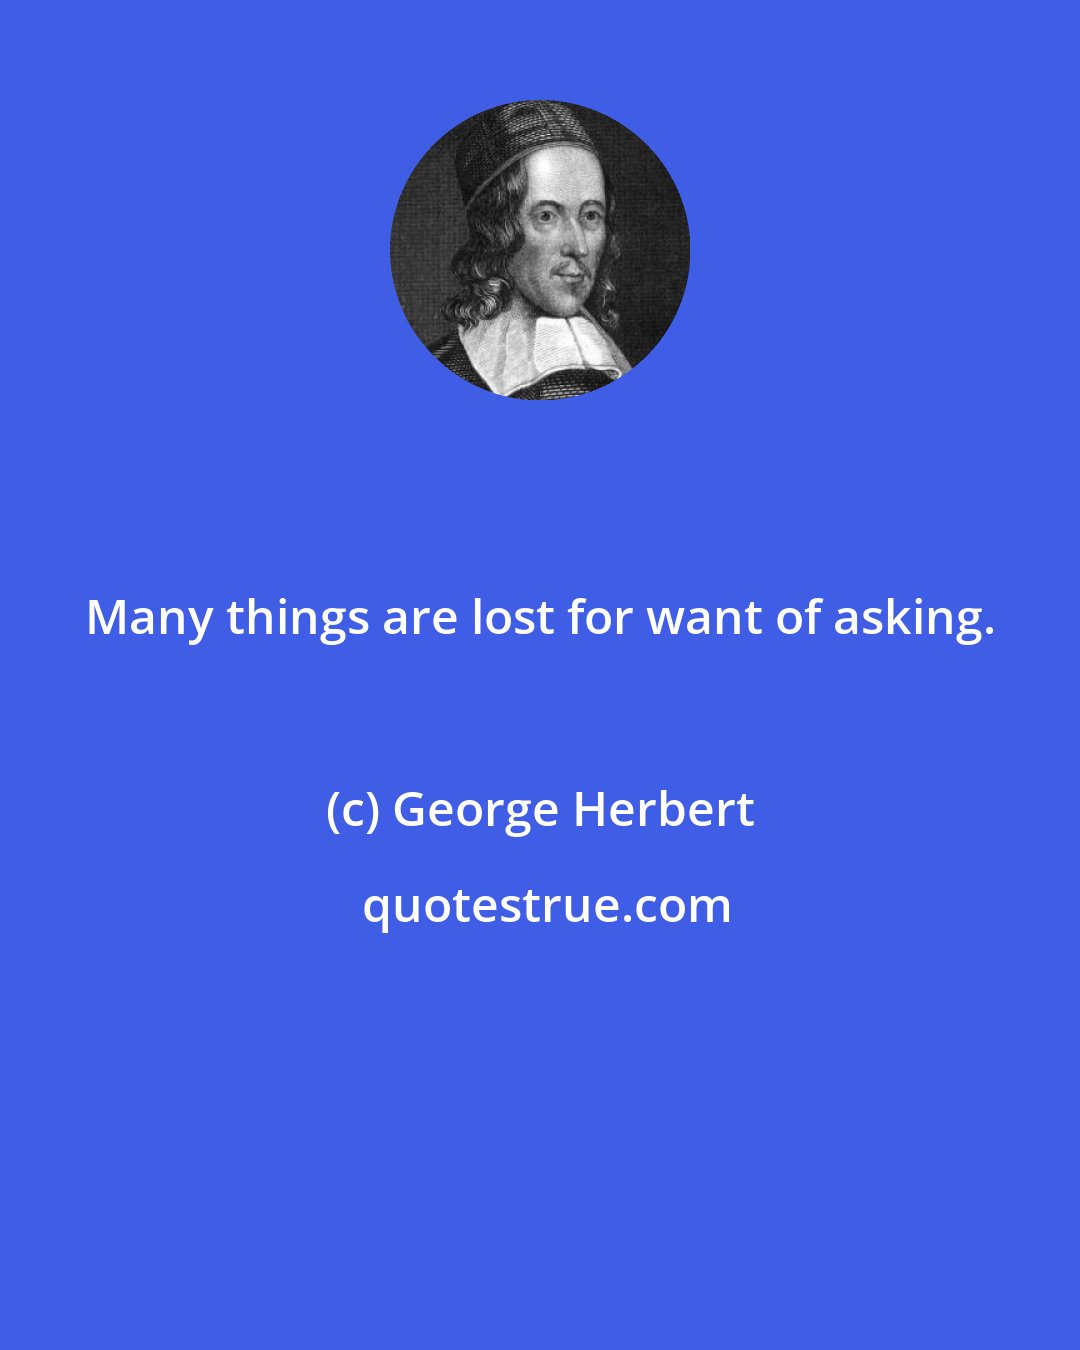 George Herbert: Many things are lost for want of asking.